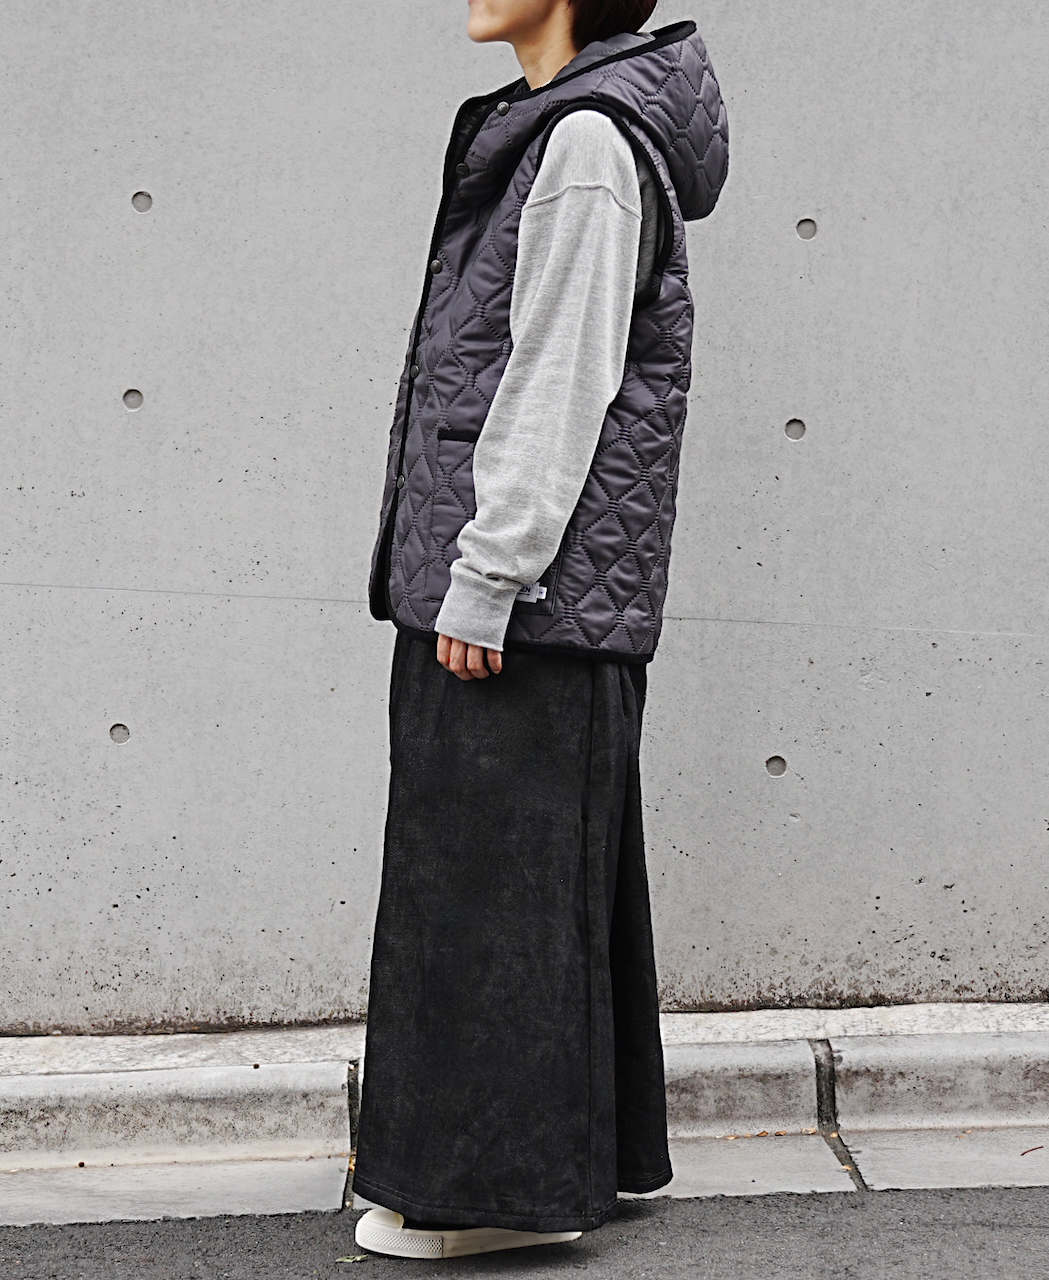 NAM2351PP (ベスト) POLY×POLY HEAT QUILT HOODED VEST